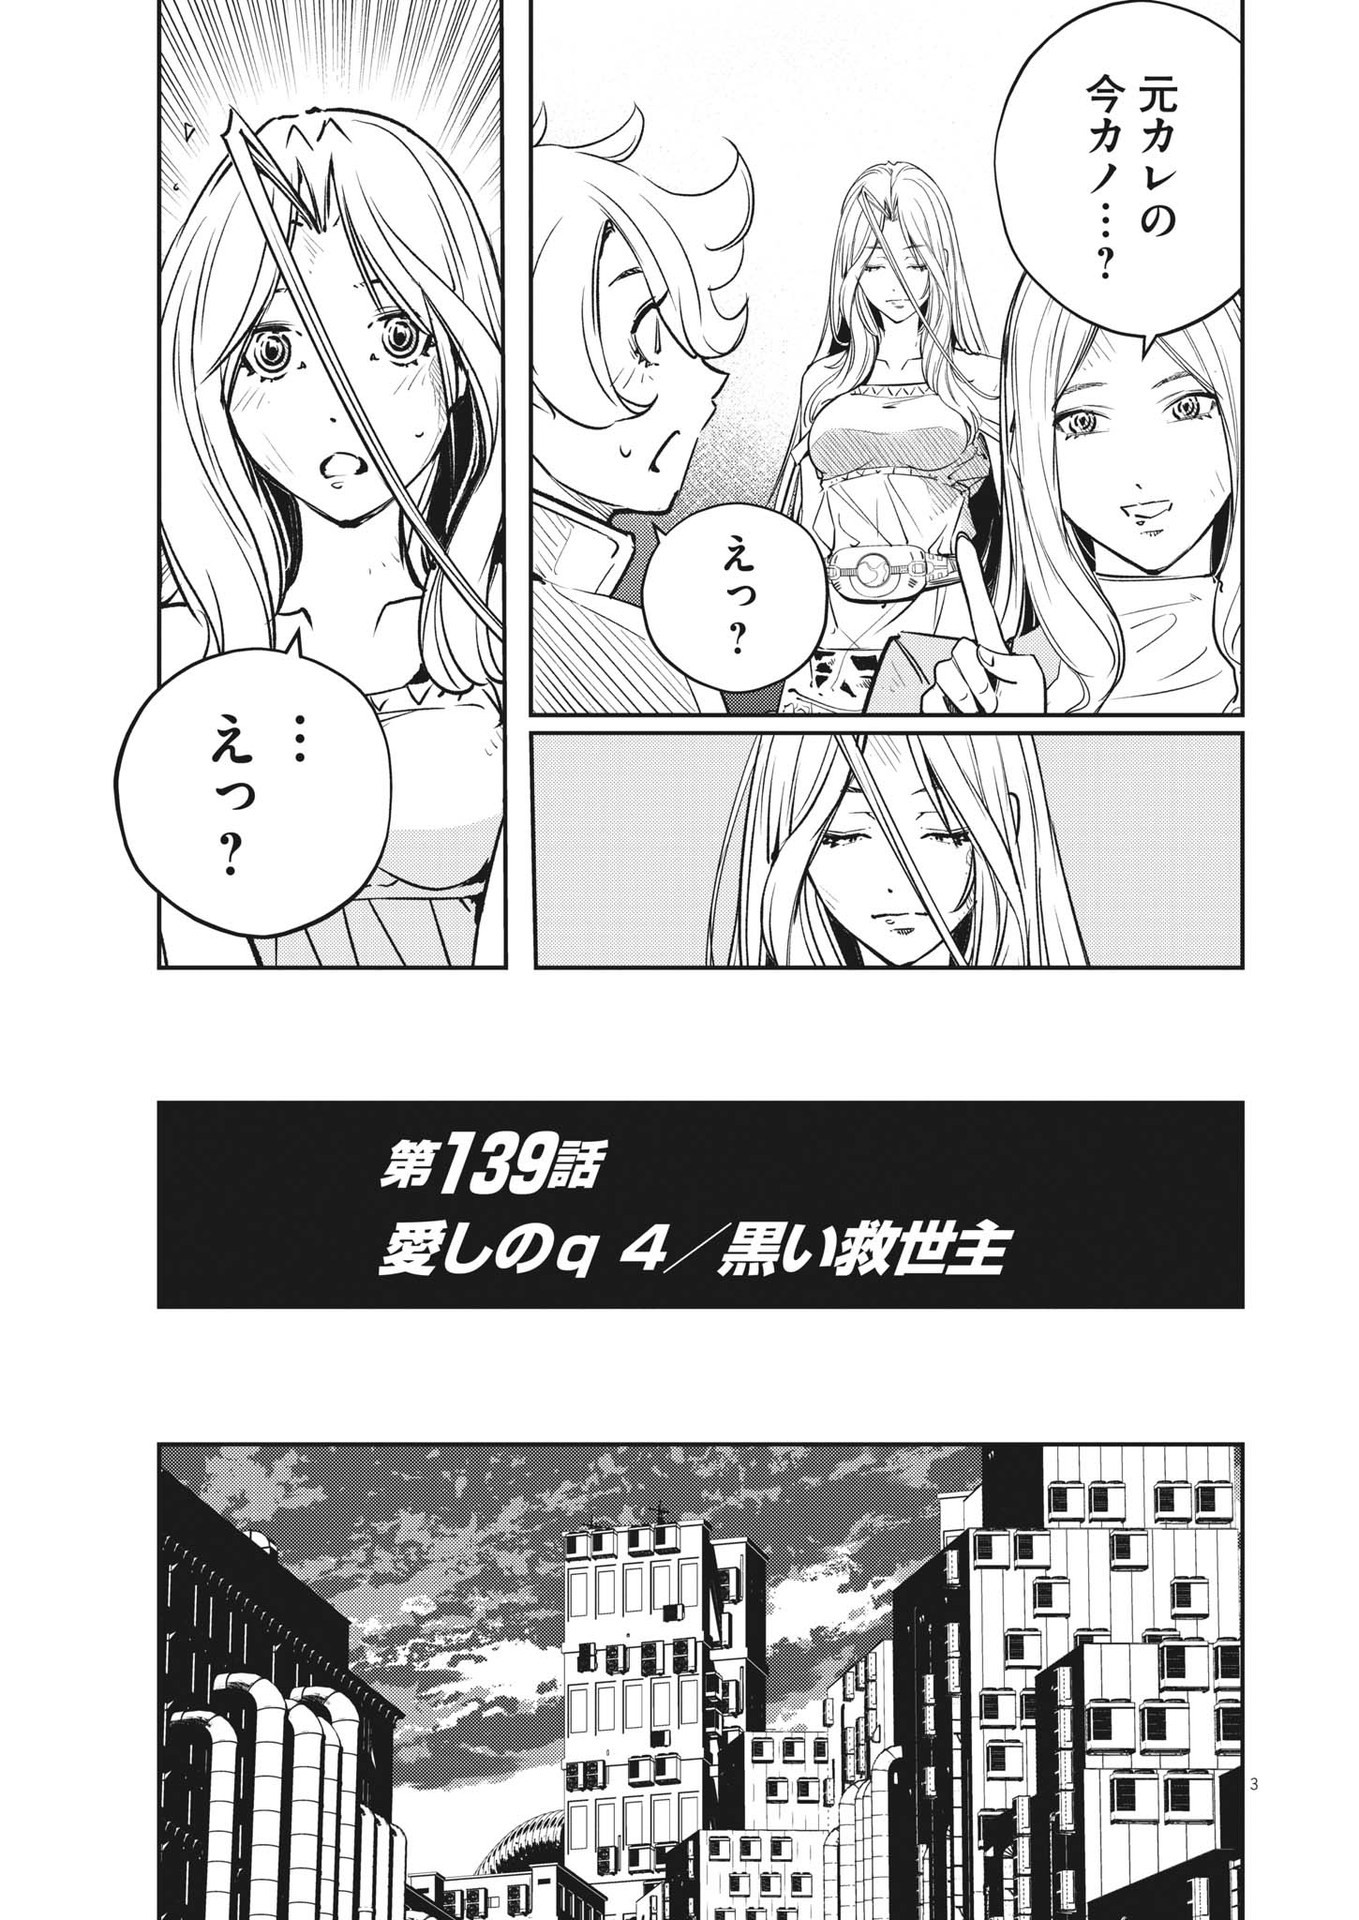 Kamen Rider W: Fuuto Tantei - Chapter 139 - Page 3